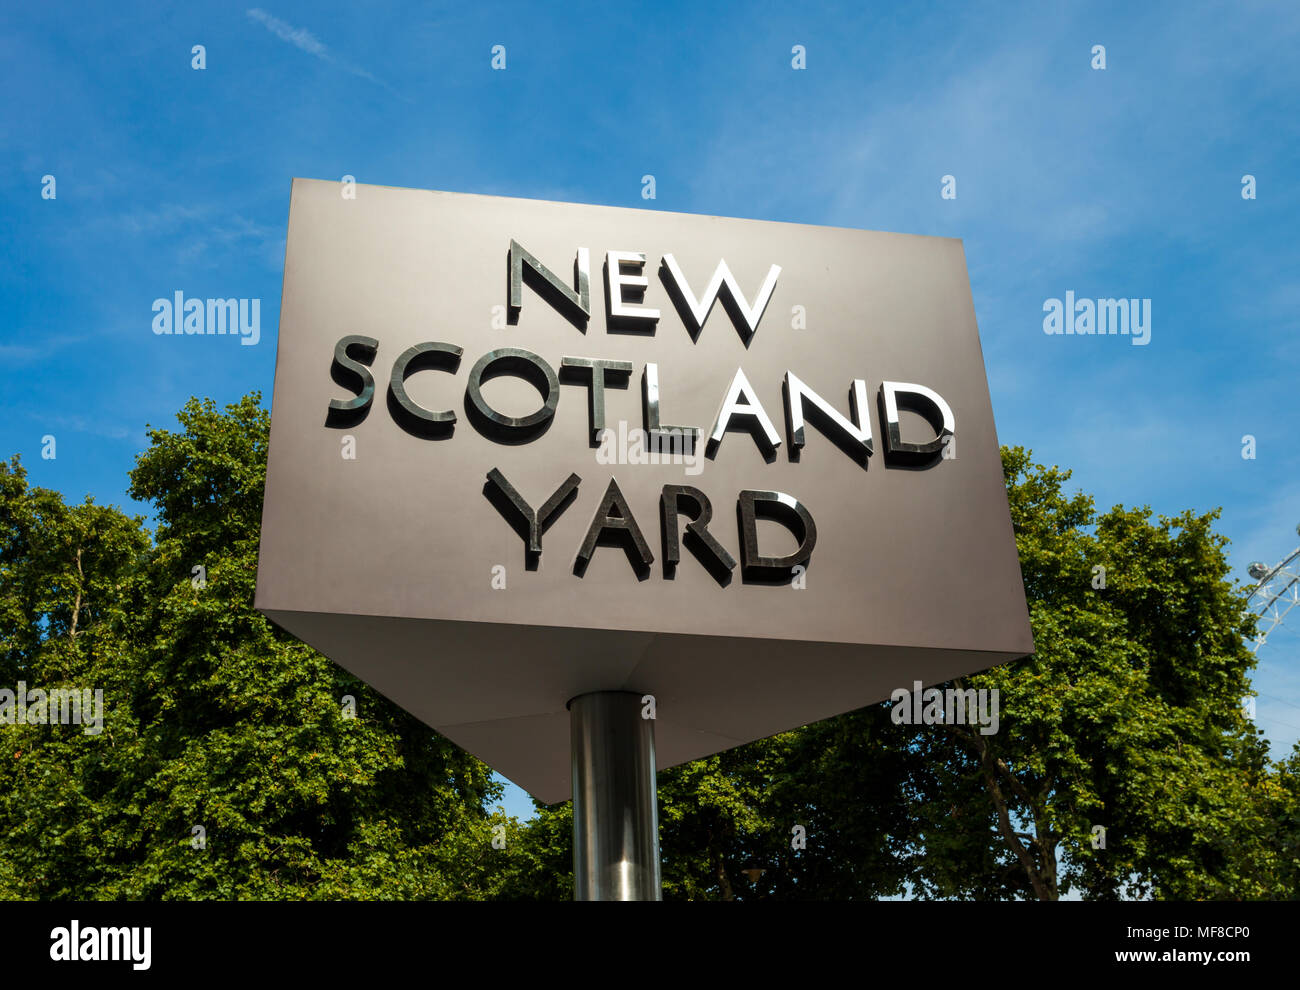 LONDON, UNITED KINGDOM - AUGUST 28, 2017 - The New Scotland Yard sign for the headquarters of the Metropolitan Police Service. Stock Photo